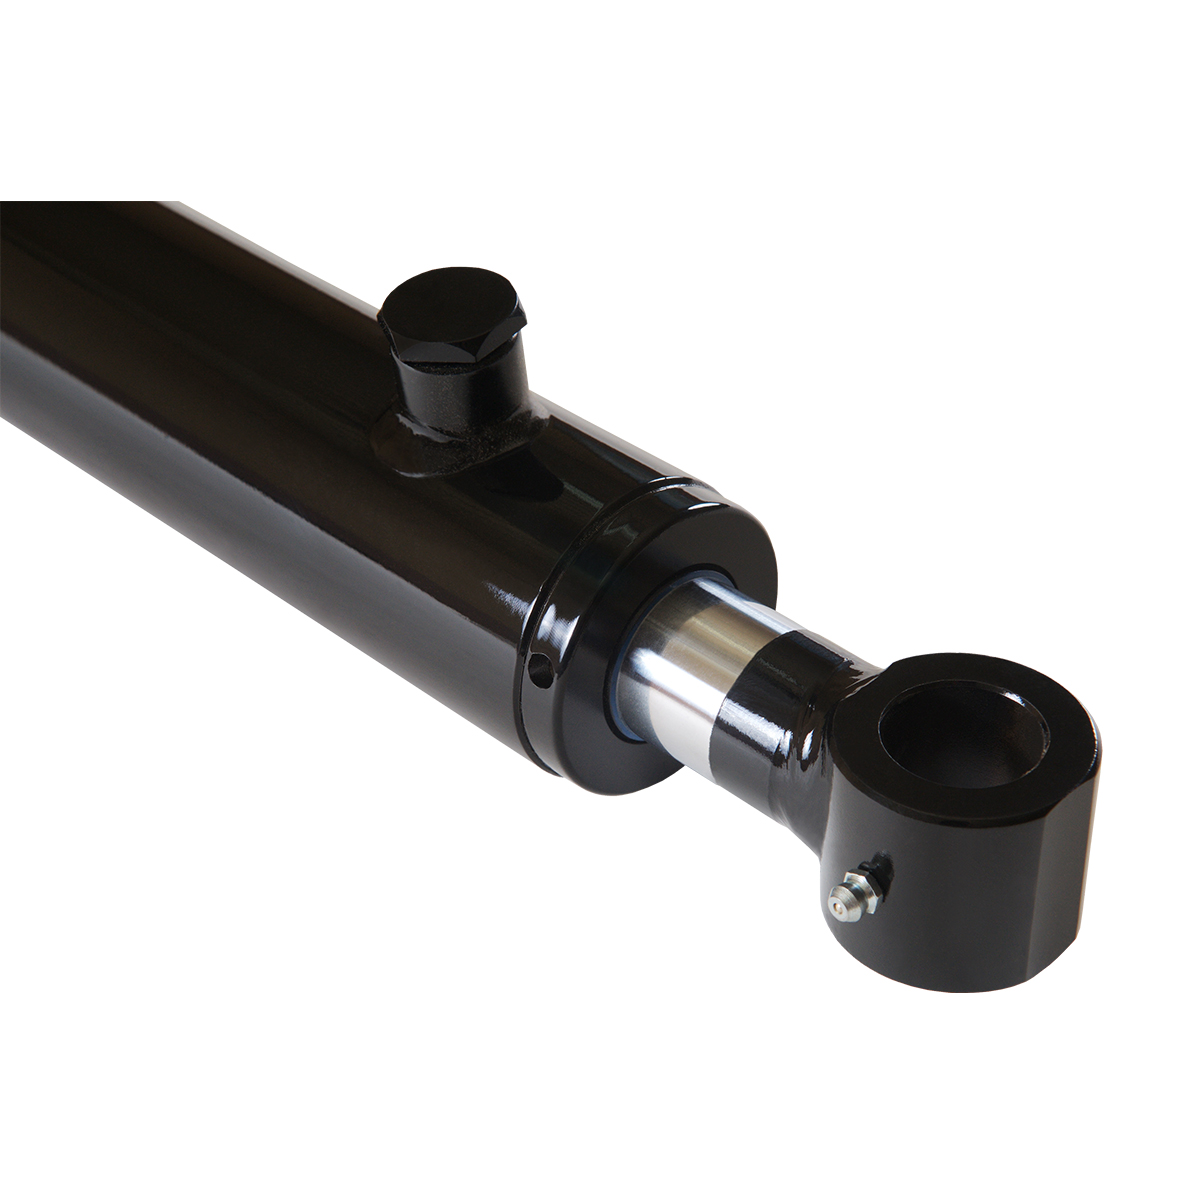 1.5 bore x 18 stroke hydraulic cylinder, welded tang double acting cylinder | Magister Hydraulics